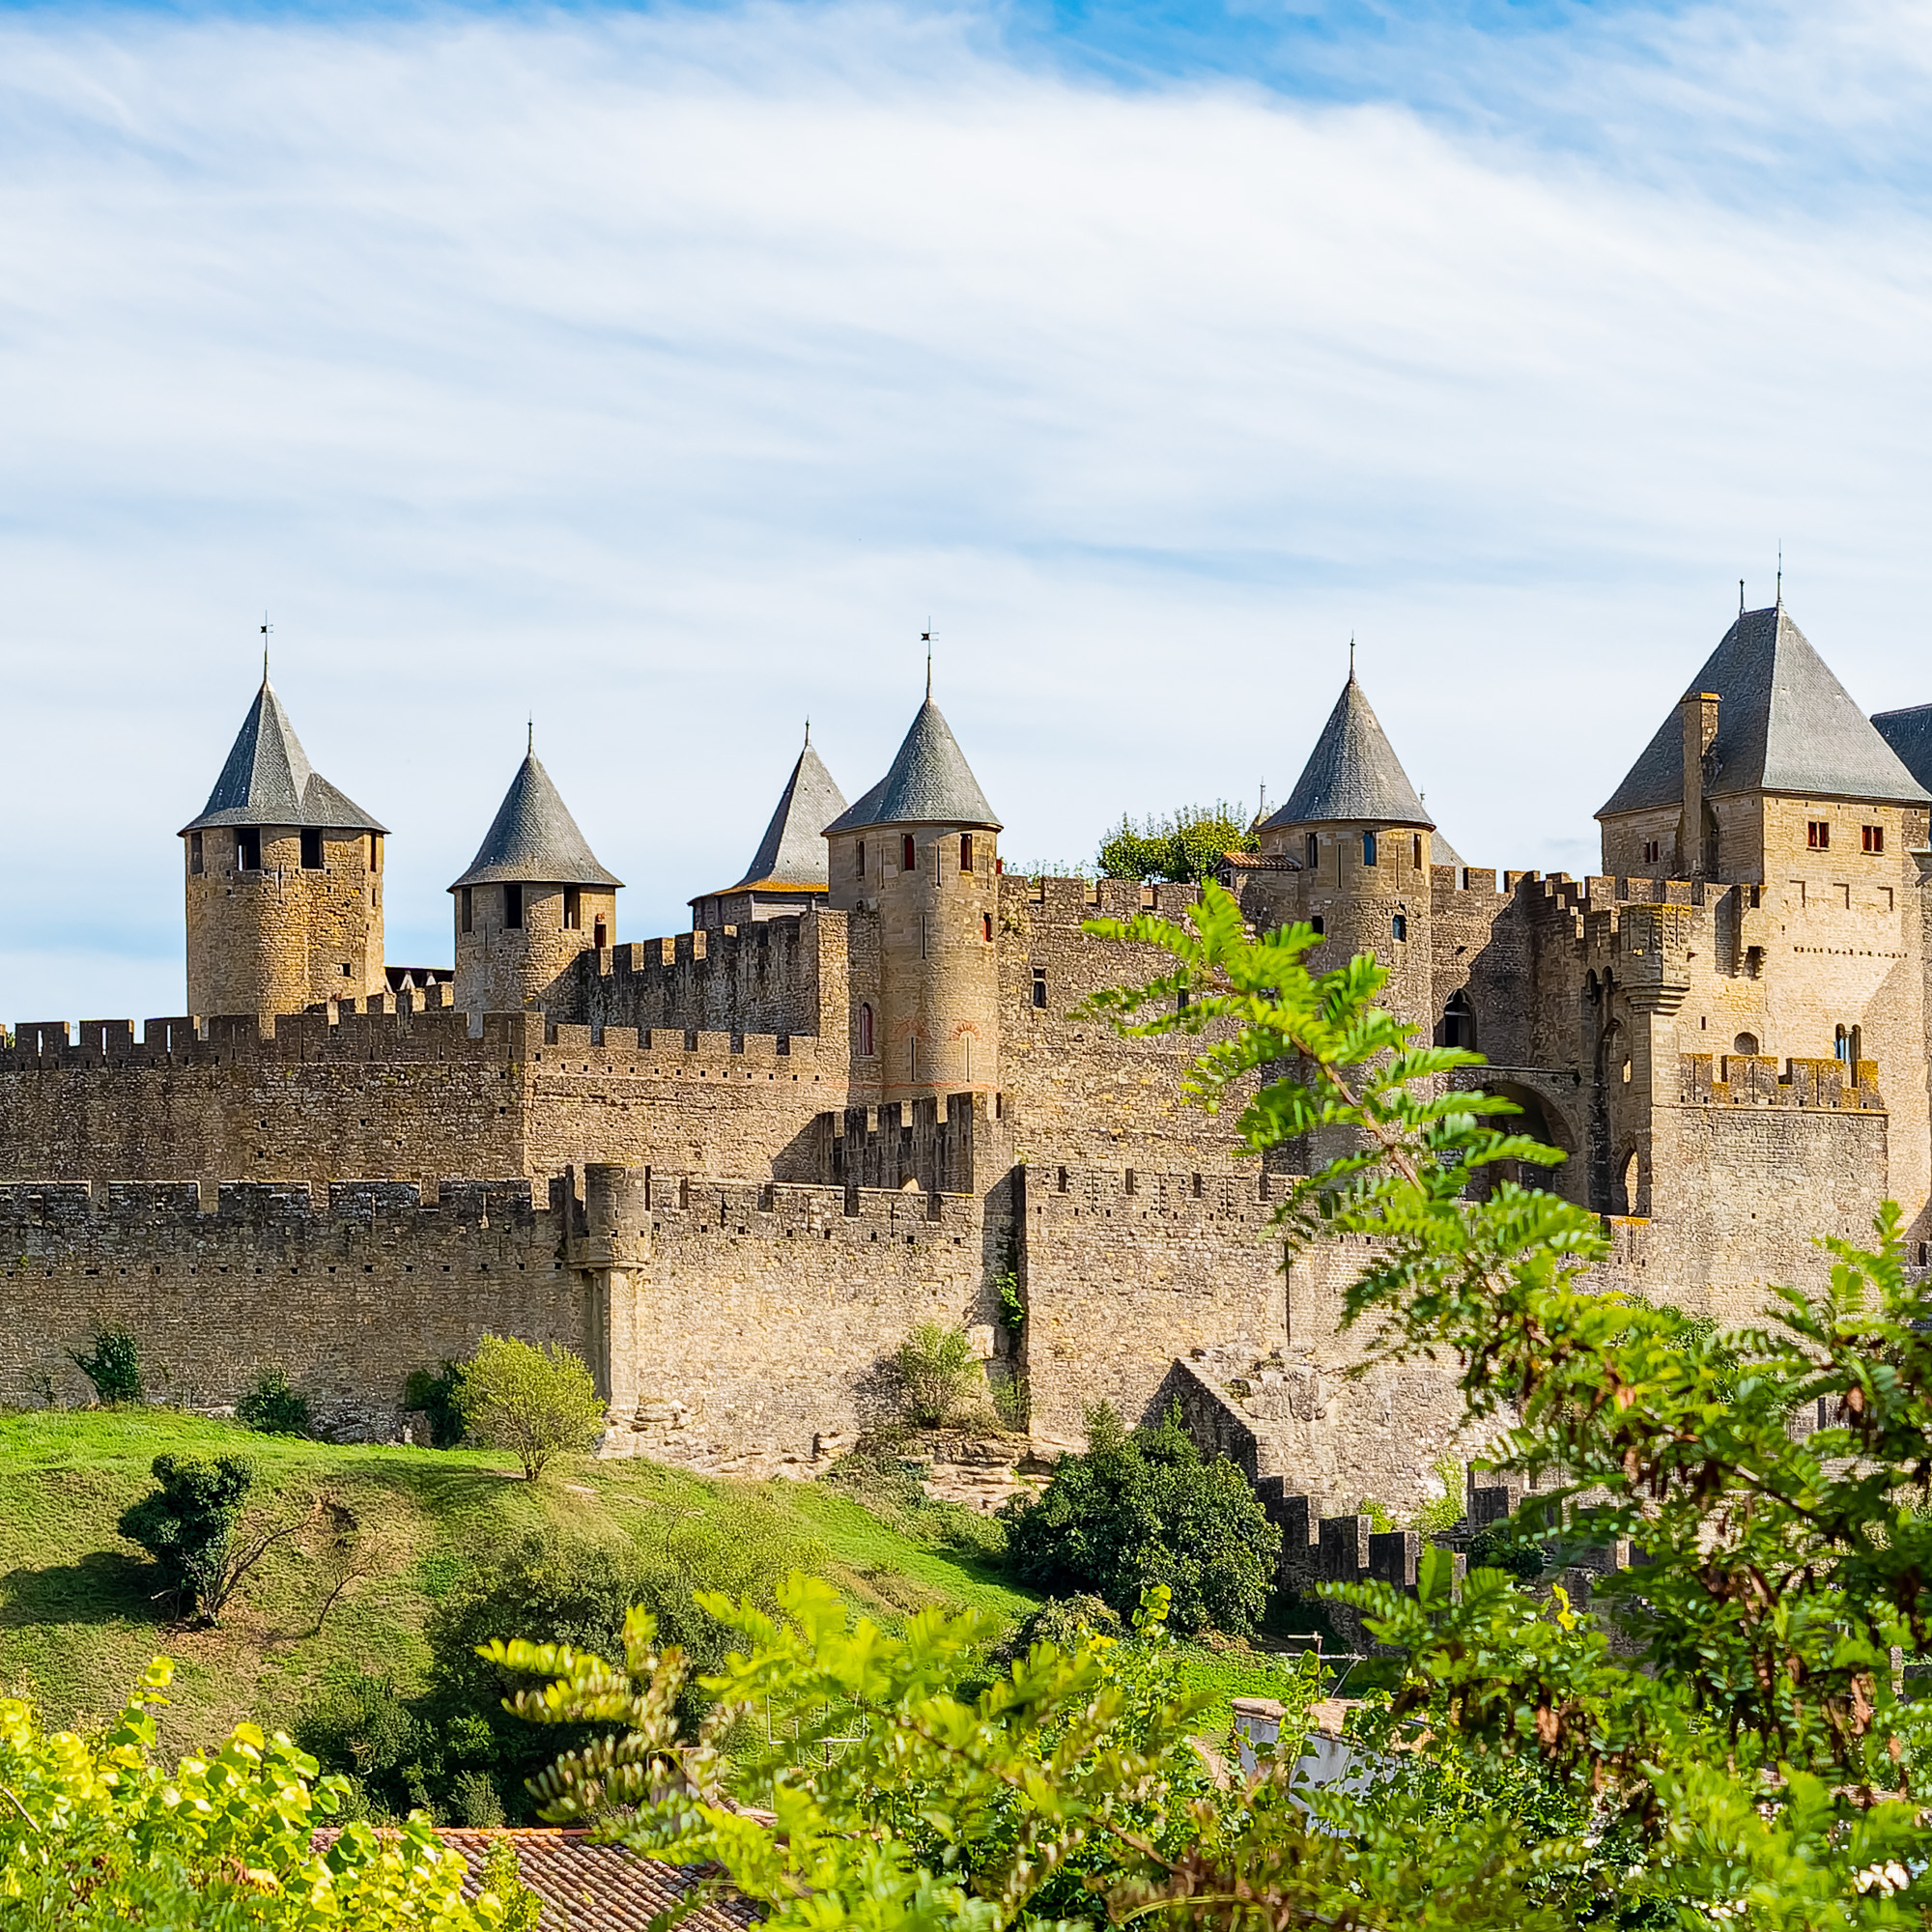 Carcassonne, the fortress city